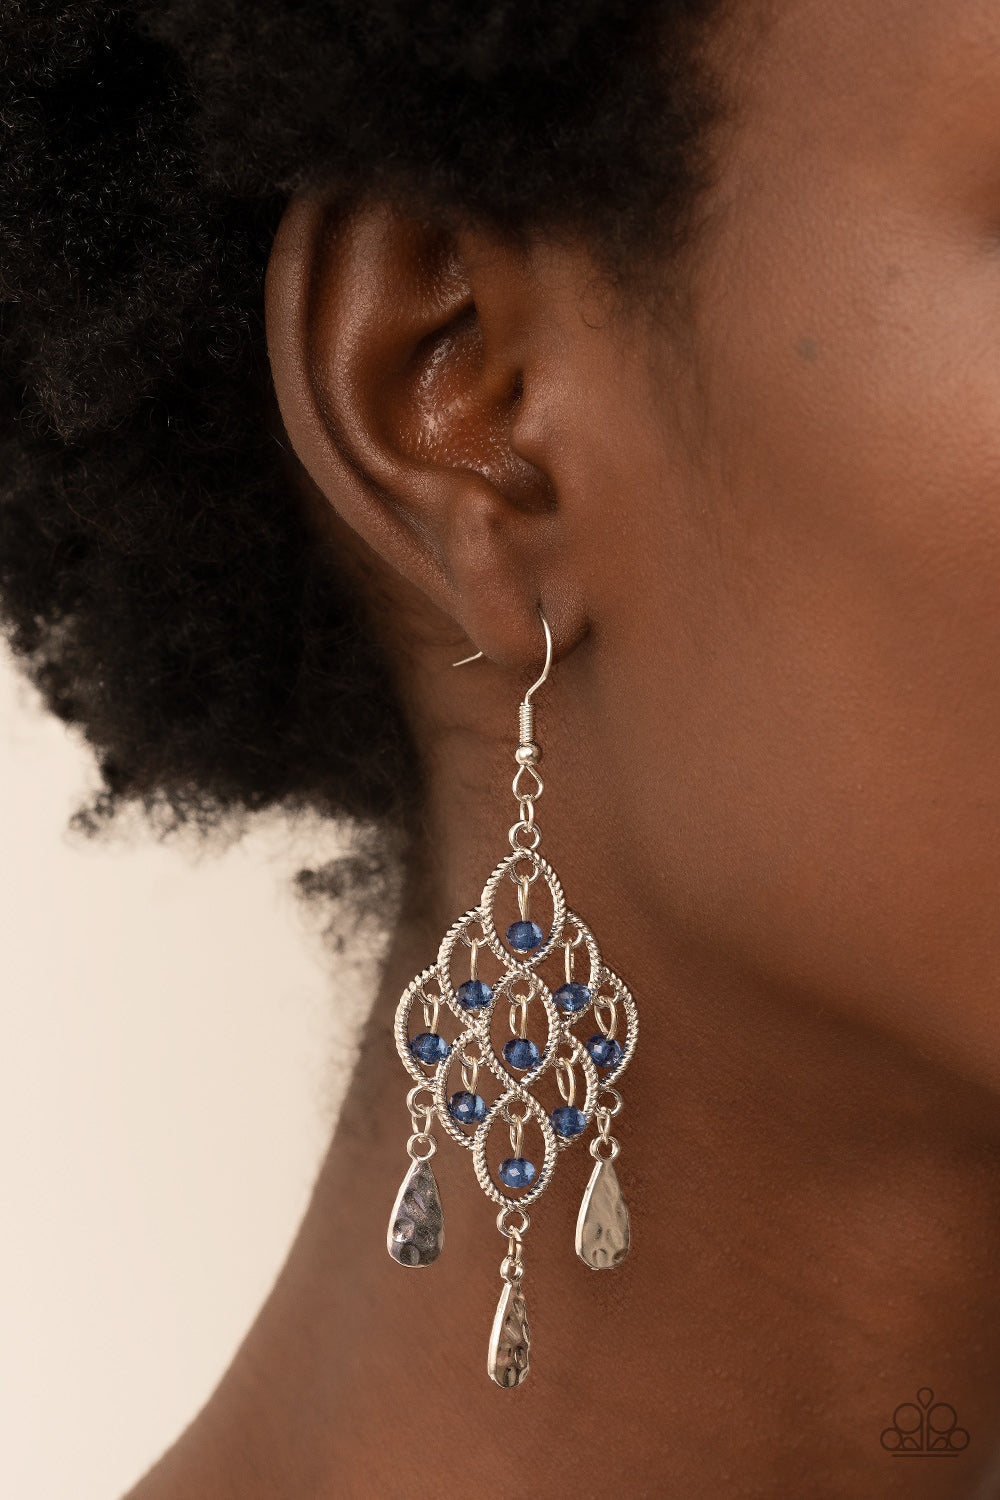 Sentimental Shimmer - Blue and Silver Earrings - Paparazzi Accessories - Hammered silver teardrops swing from the bottom of a frame composed of silvery ropelike filigree that gently loops into an airy diamond shape. Tiers of dainty blue crystal-like beads cascade from the frilly frame, adding shimmery glints of color.